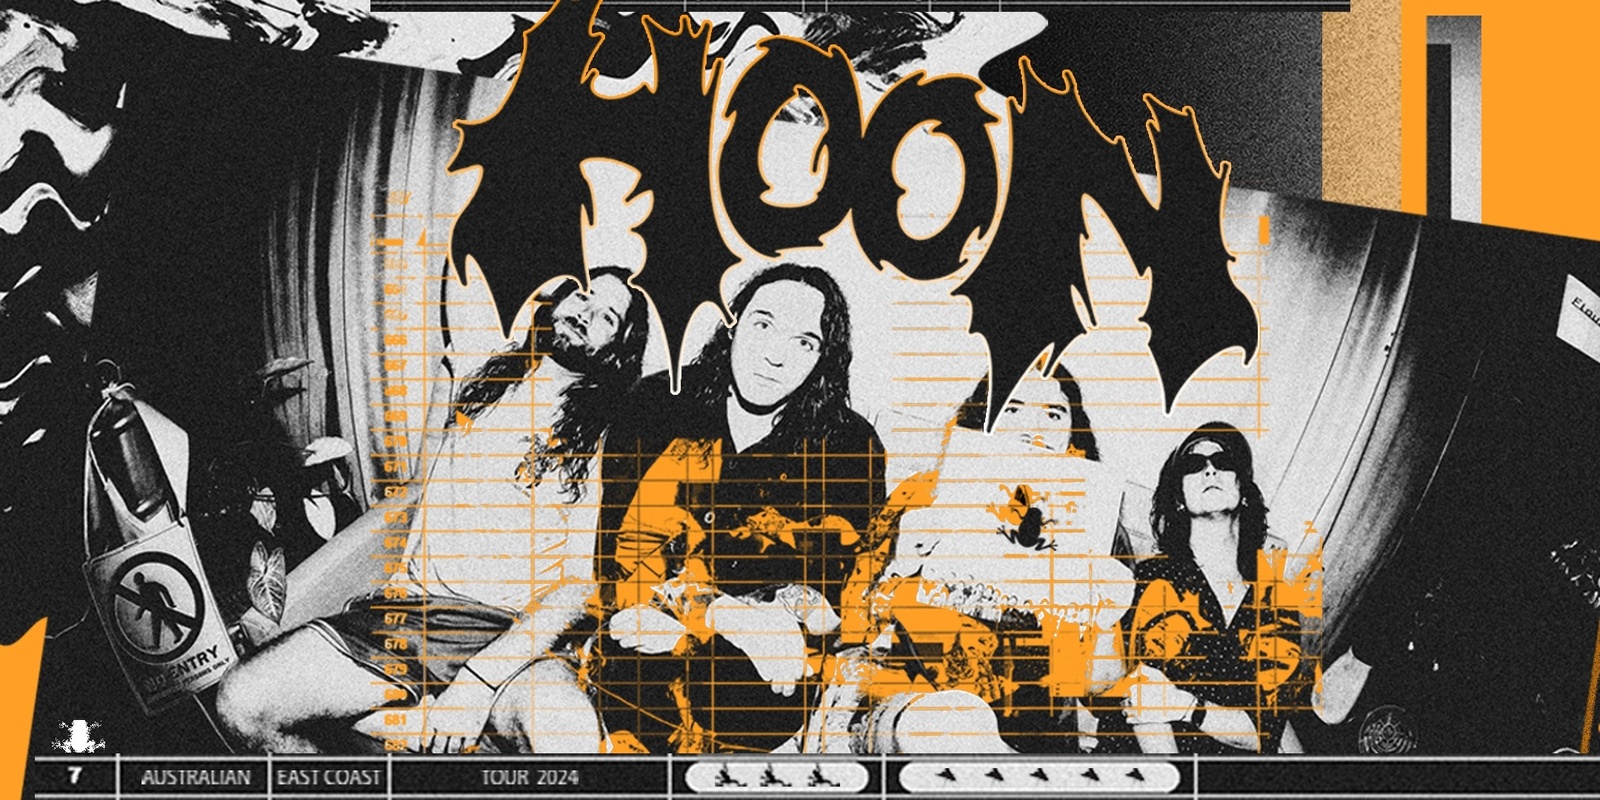 Banner image for HOON @ The Lord Gladstone ft. Lady Lazarus, The Darrans + Art by Sniper Ash